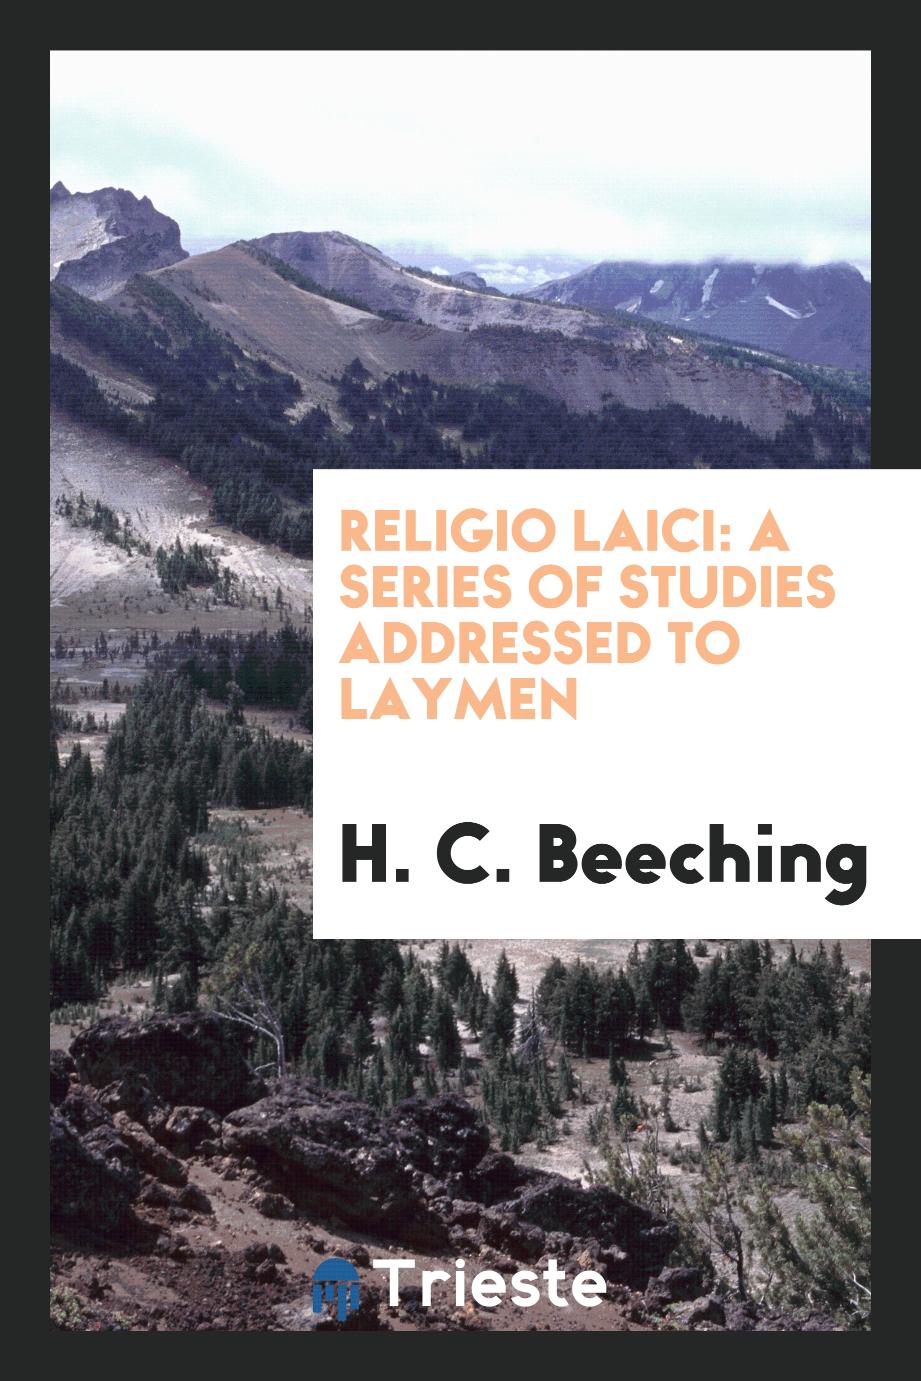 Religio laici: a series of studies addressed to laymen